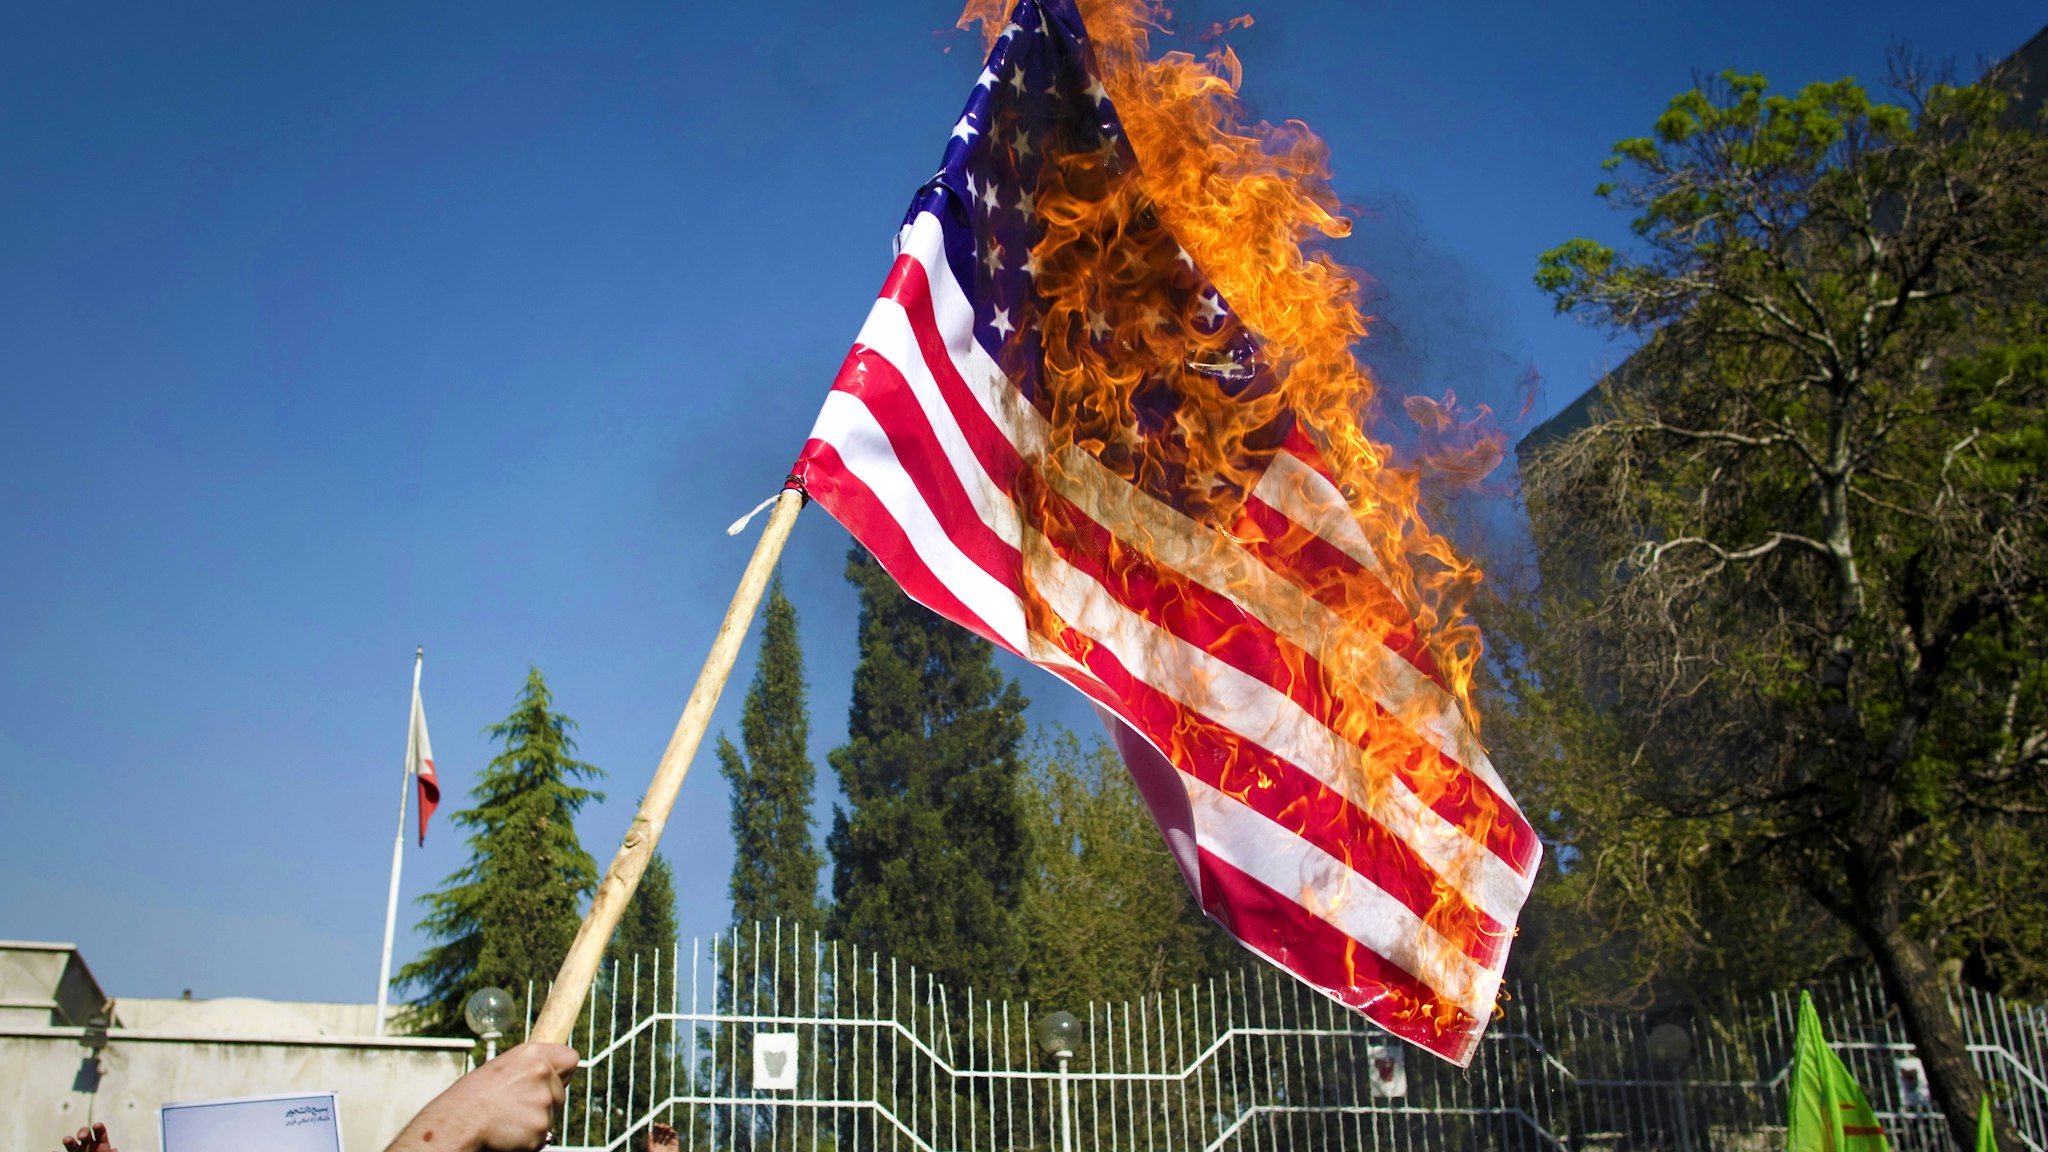 Iranian hardline students burn a US flag during a demonstration against the Bahraini government's suppression of protests led by the mainly-Shiite opposition in the kingdom outside the Bahraini embassy in Tehran on April 15, 2011 as Iran has demanded intervention from the United Nations Security Council "to stop the killing of the people of Bahrain".